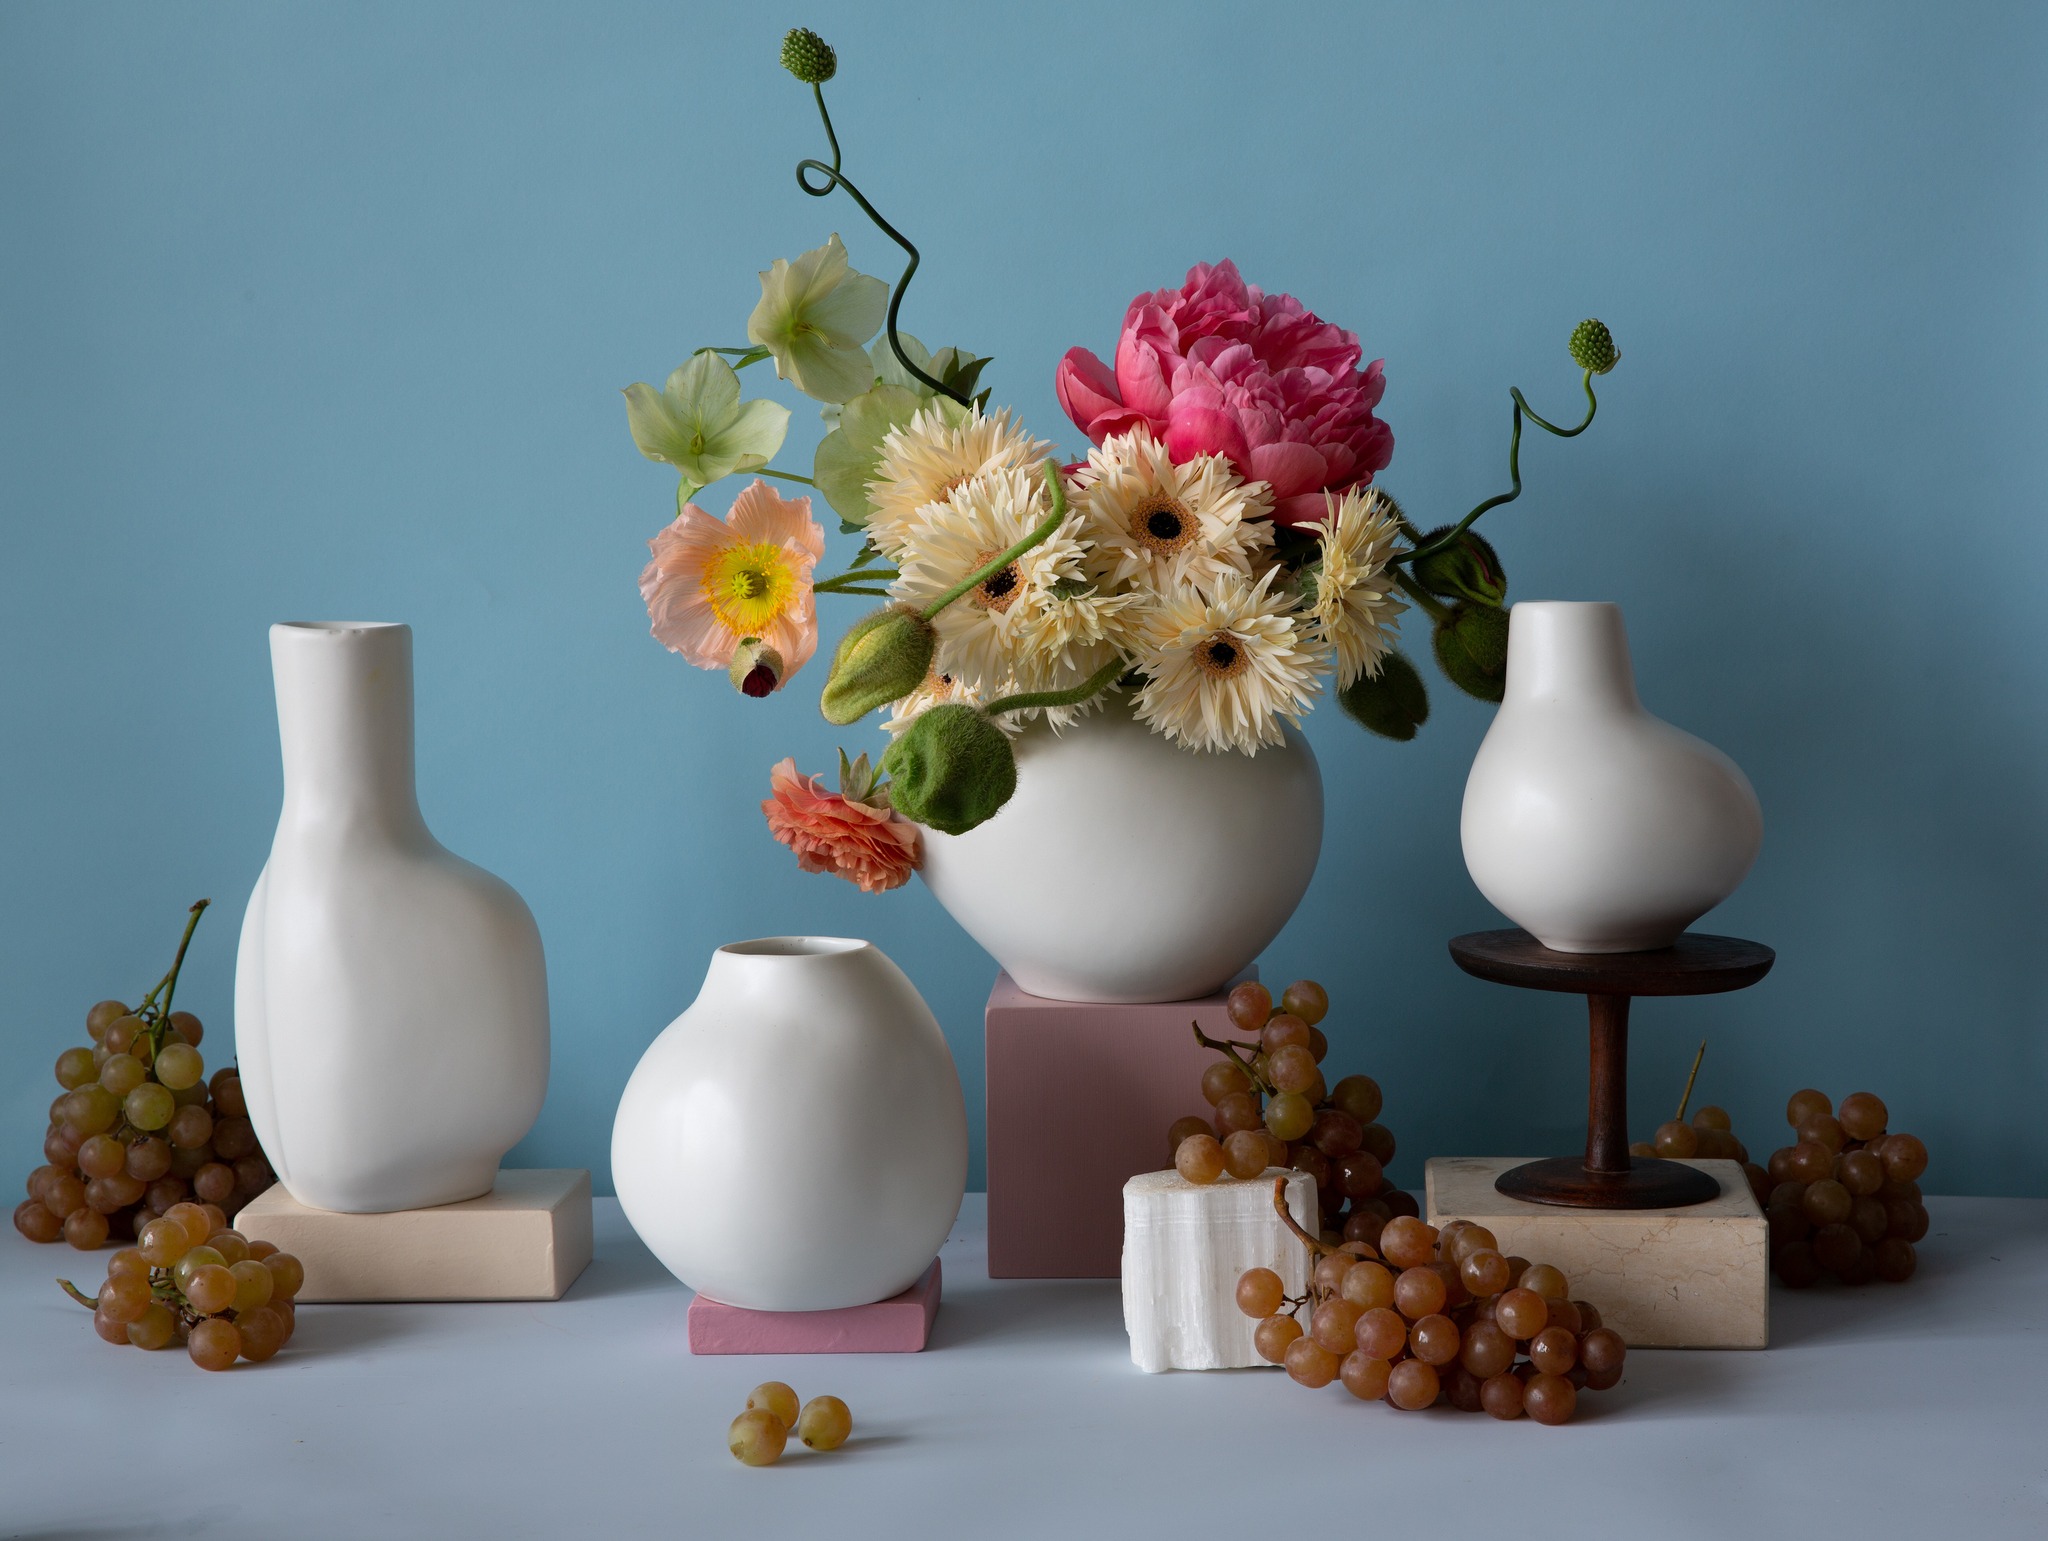 Various sizes of white porcelain vases with flowers and fruit accents.